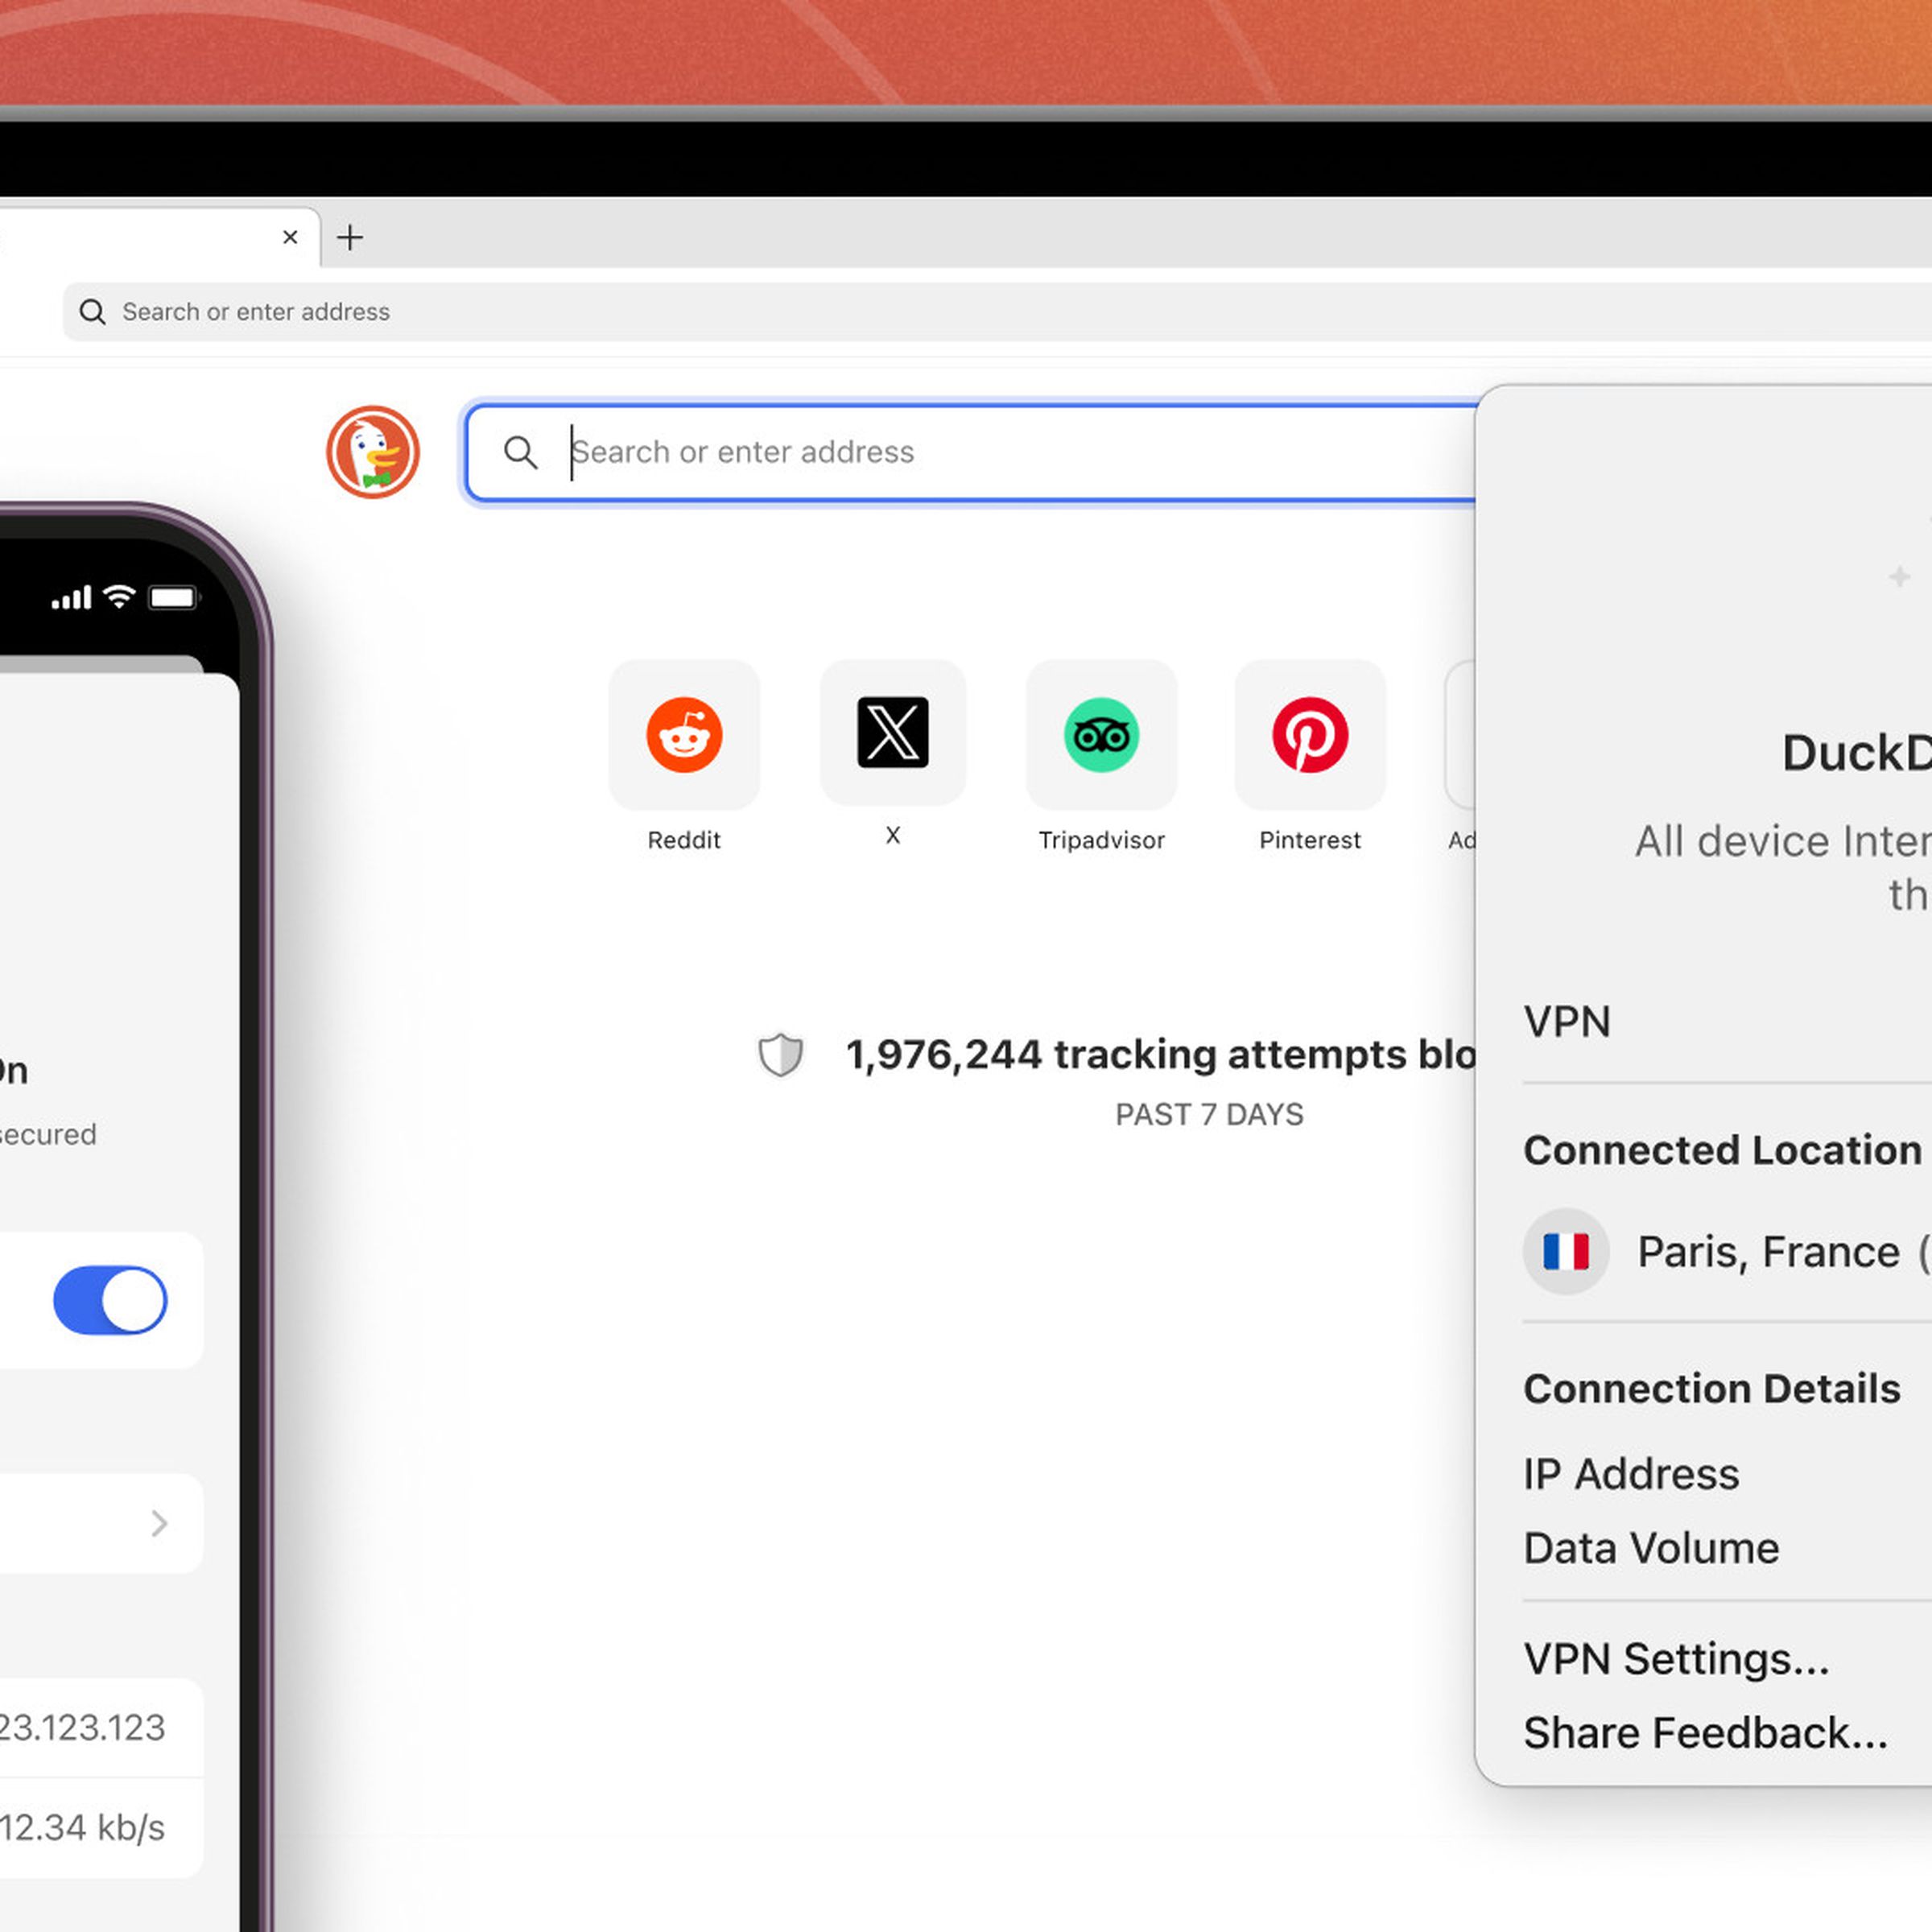 A screenshot of DuckDuckGo’s new VPN, part of its PrivacyPro package. 